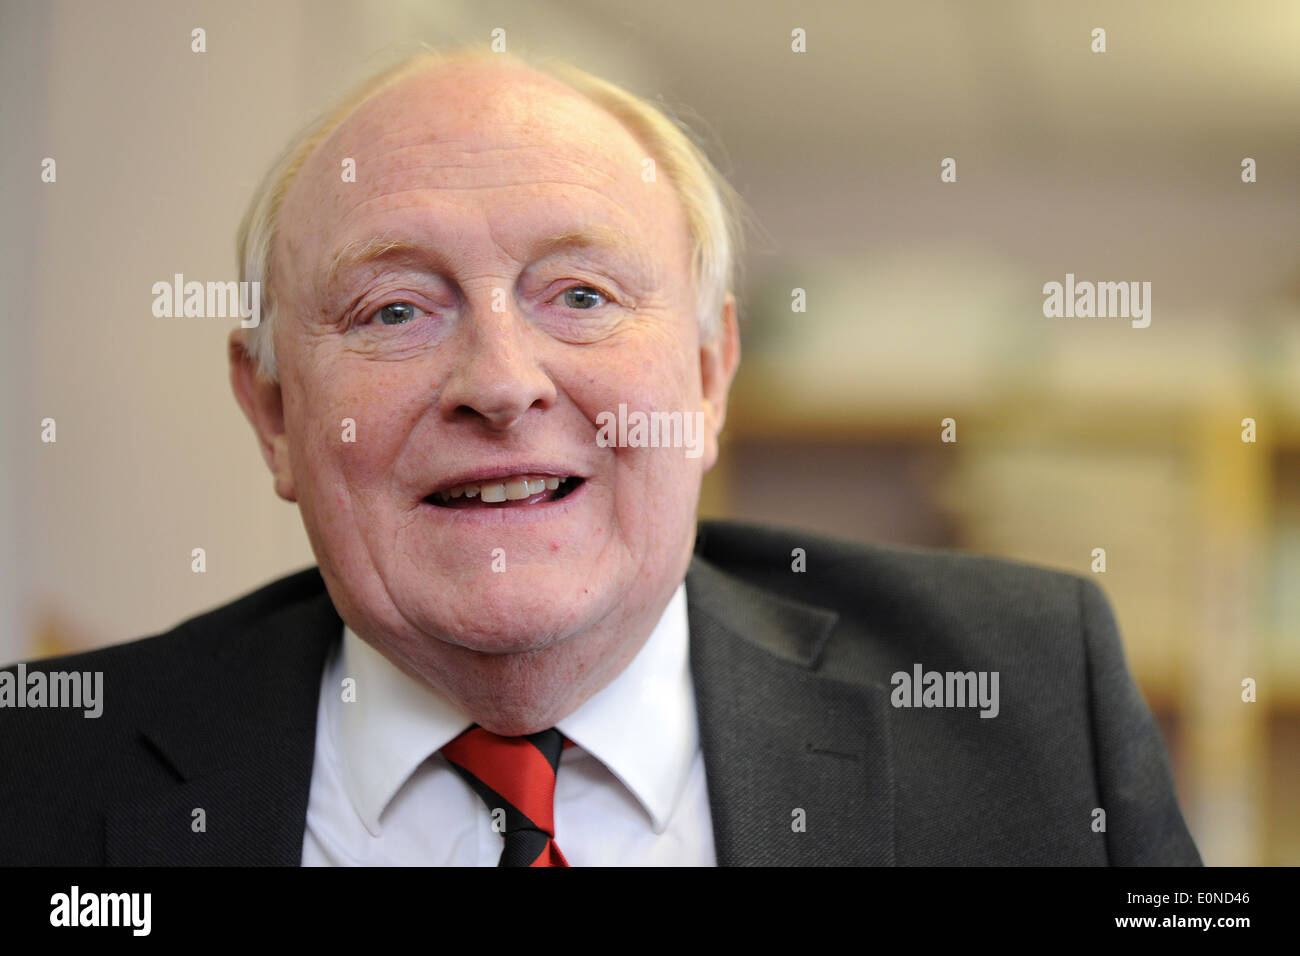 Neil Kinnock former MP and leader of the Labour party. Stock Photo